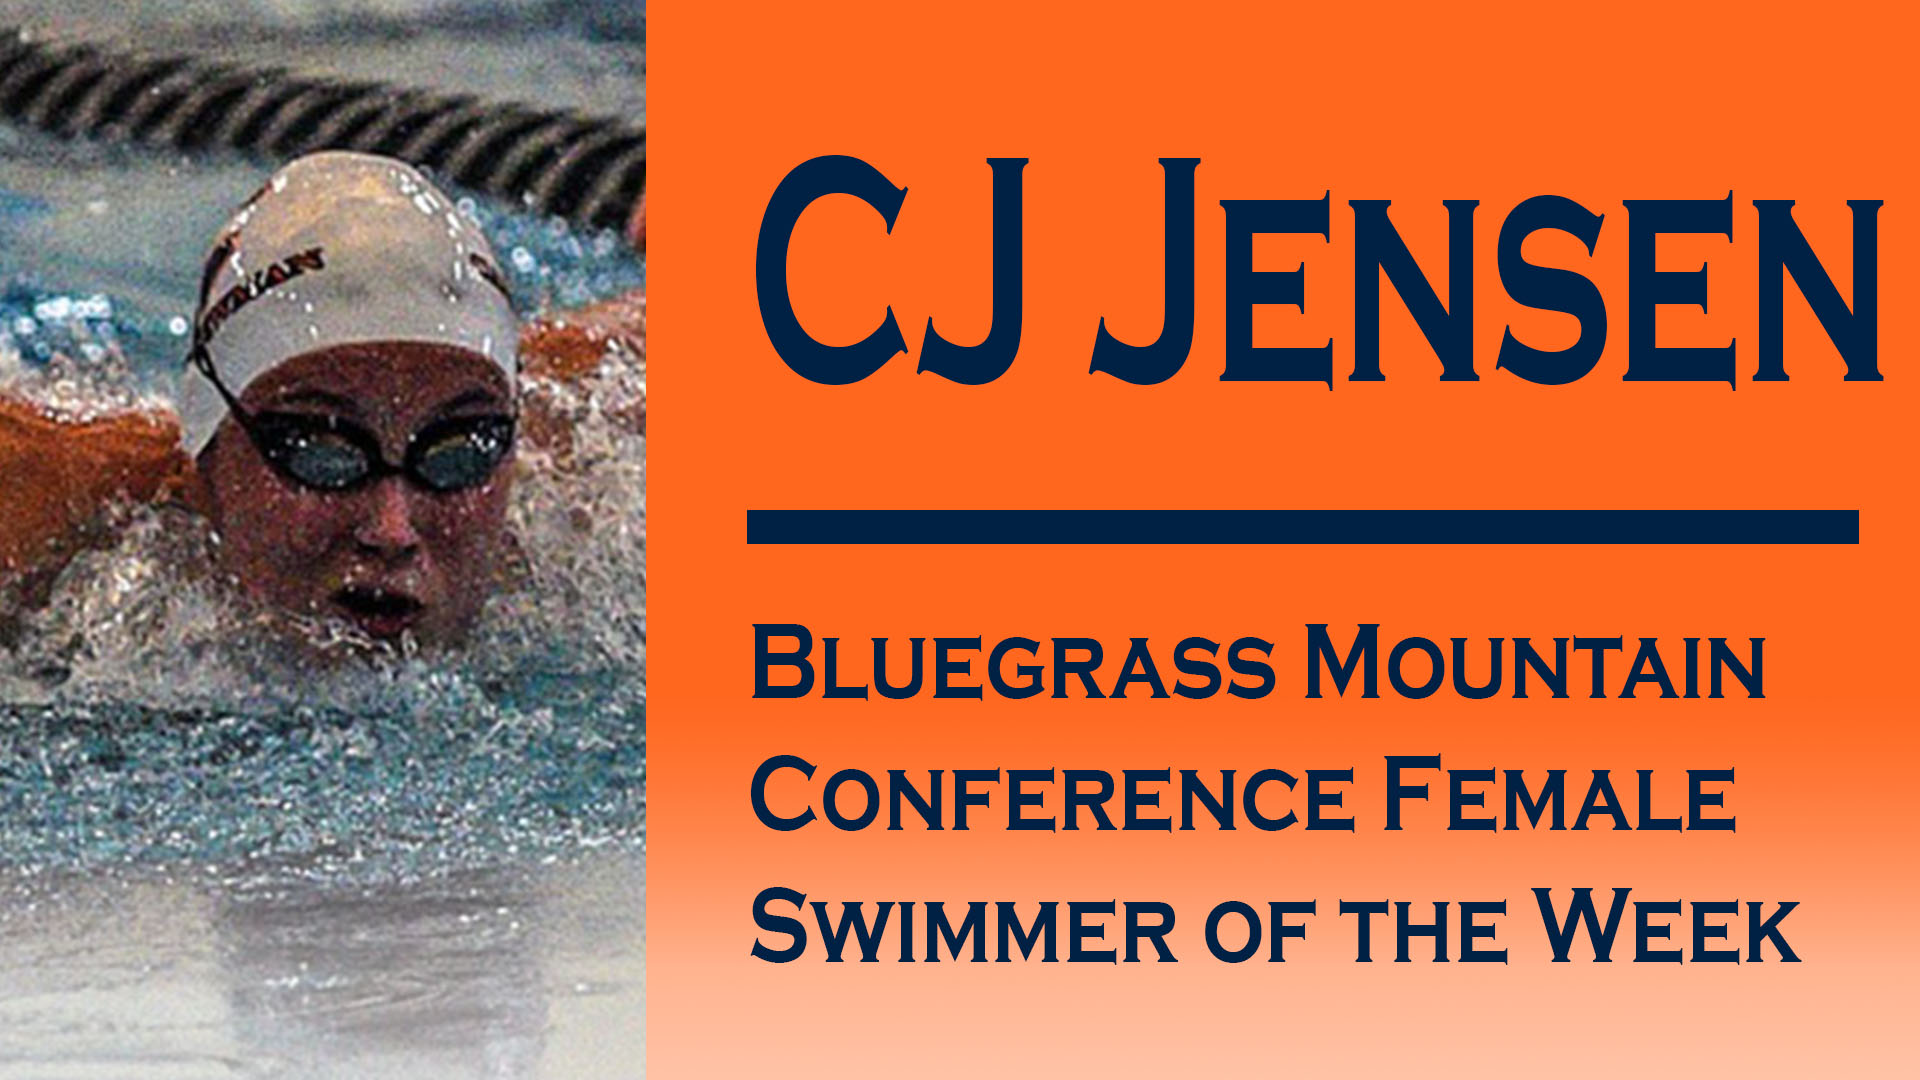 Jensen Named Bluegrass Mountain Conference Female Swimmer of the Week